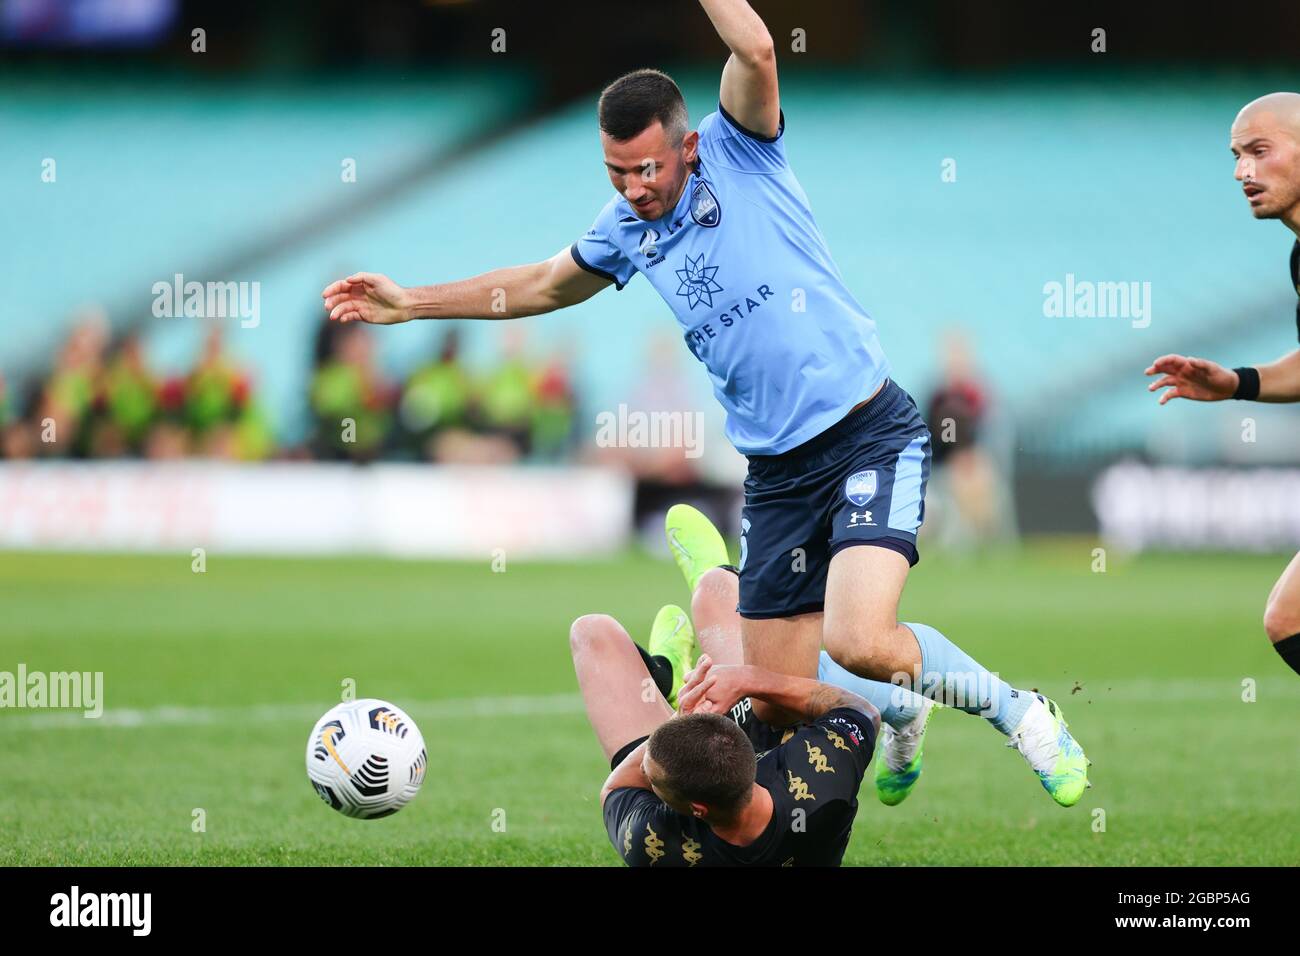 SYDNEY, AUSTRALIA - MAY 23: Ryan Mcgowan of Sydney FC clears the ball during the A-League soccer match between Sydney FC and Western Sydney Wanderers FC on May 23, 2021 at the Sydney Cricket Ground in Sydney, Australia. Credit: Pete Dovgan/Speed Media/Alamy Live News Stock Photo